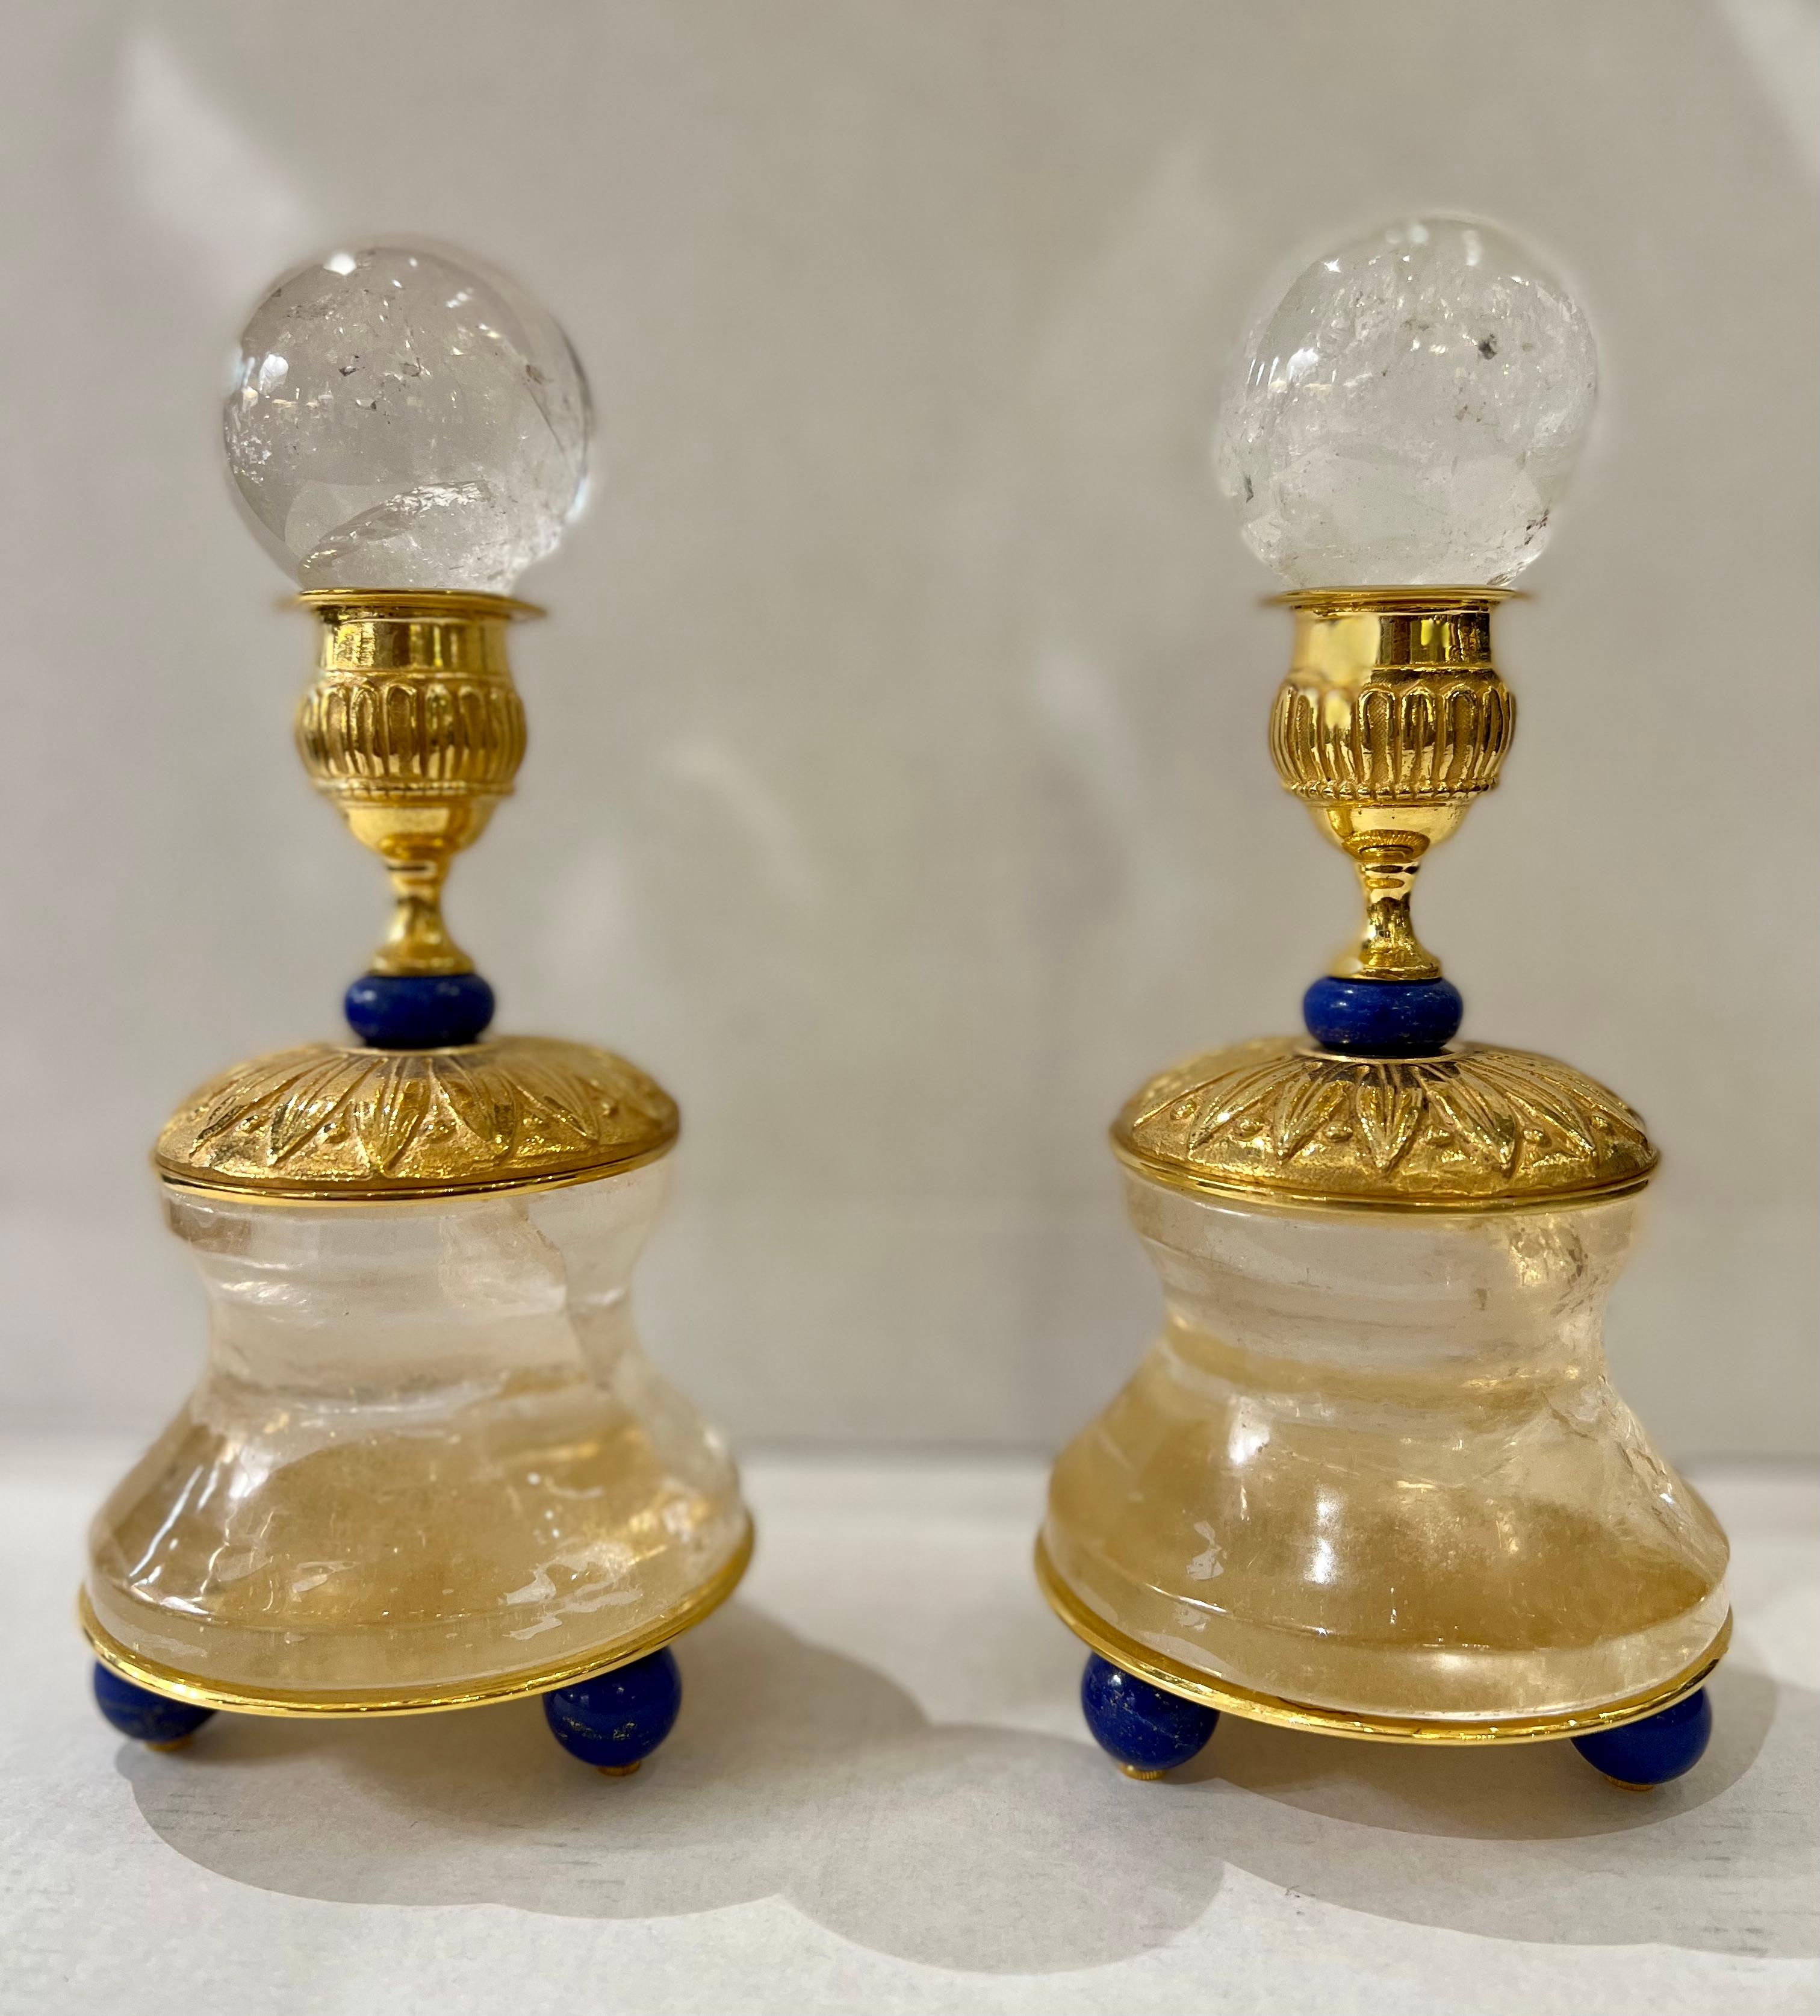 Pair of rock crystal and 24 k gold plated support rock crystal spheres (48 mm)
Unique.